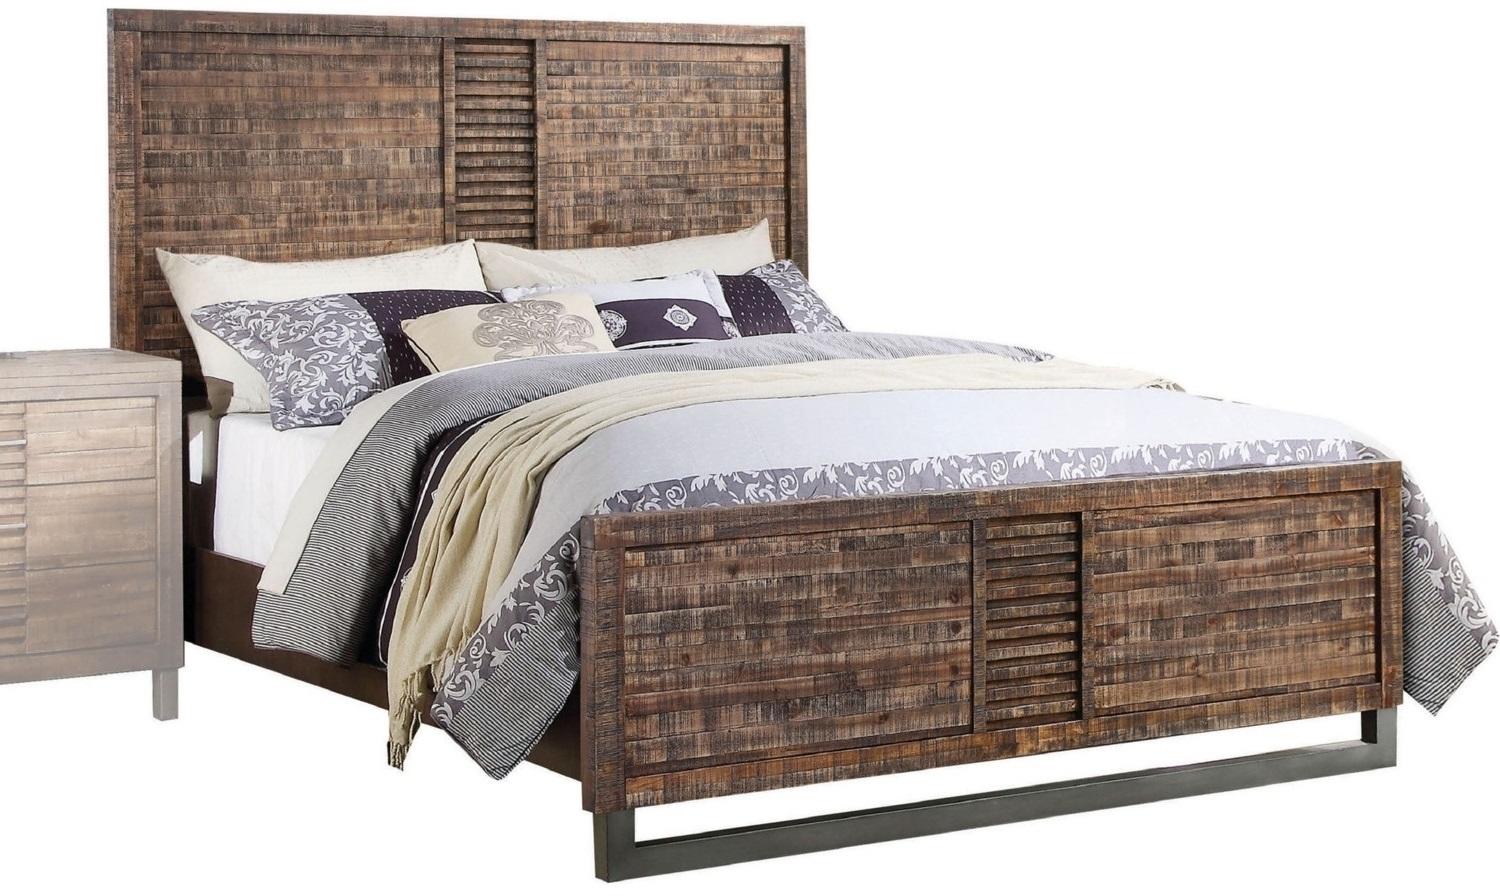 Solid Wood Queen Brown and Black Bed